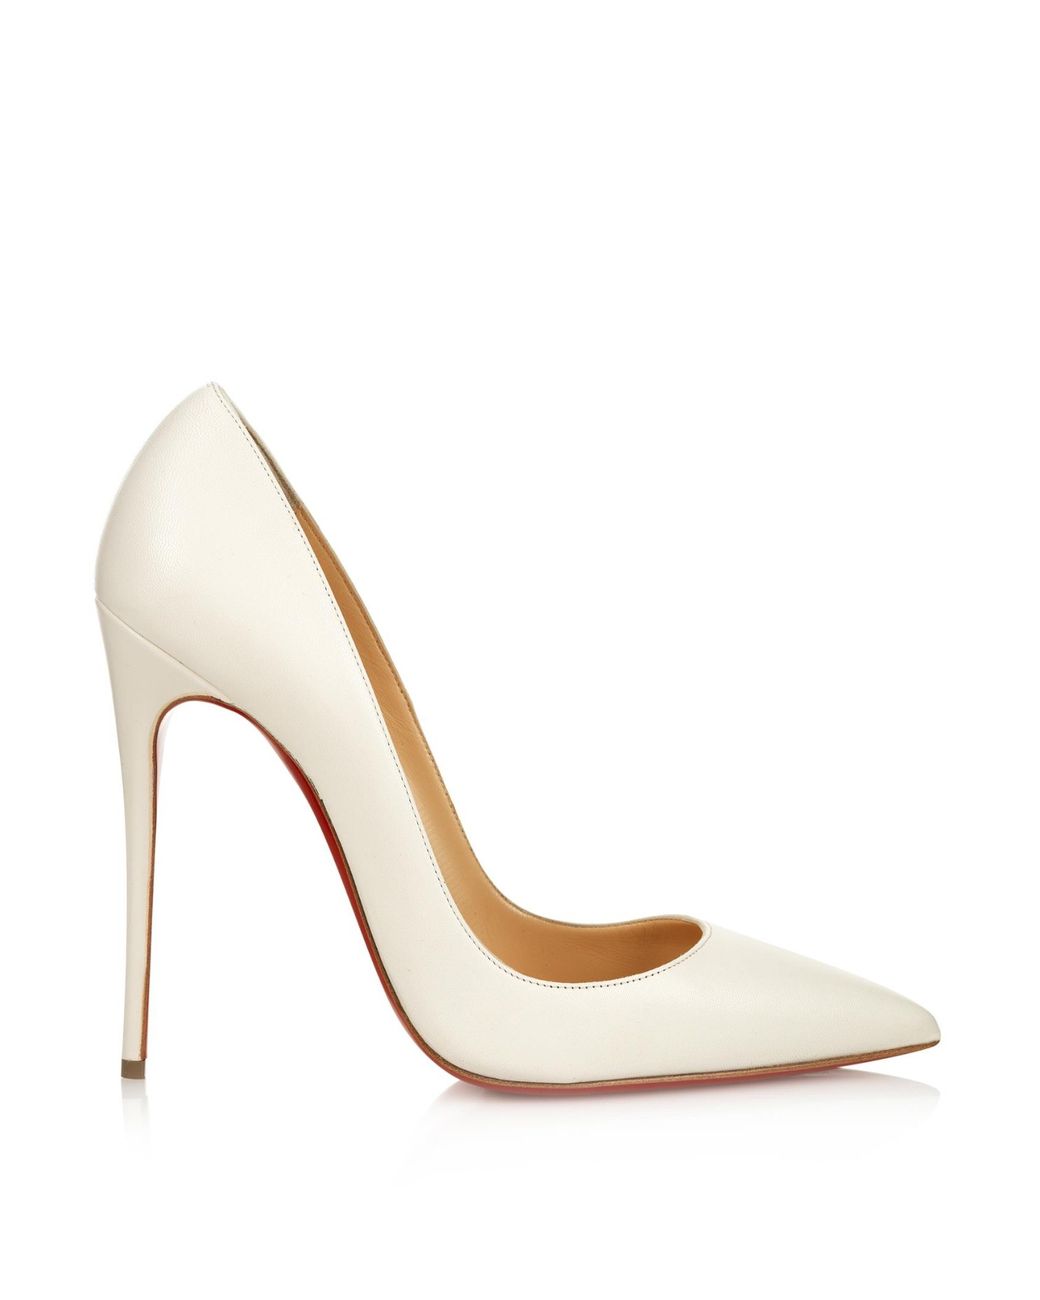 Christian Louboutin So Kate 120Mm Pumps in White | Lyst